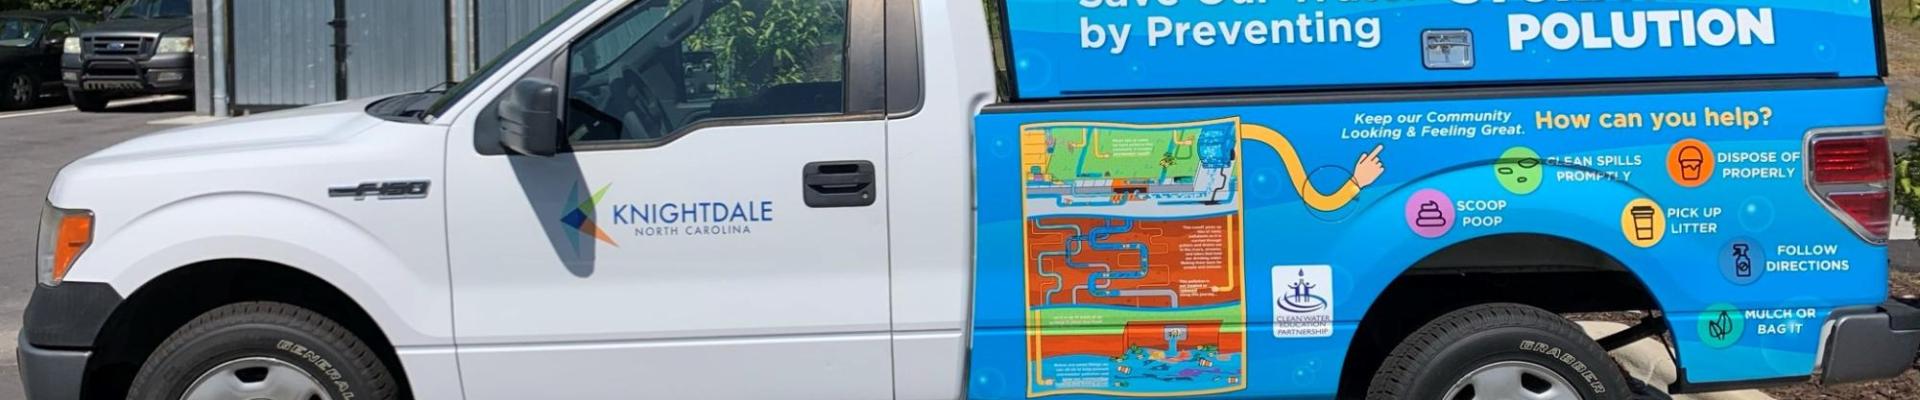 SW Fleet vehicle displaying stormwater education materials and IDDE hotline 